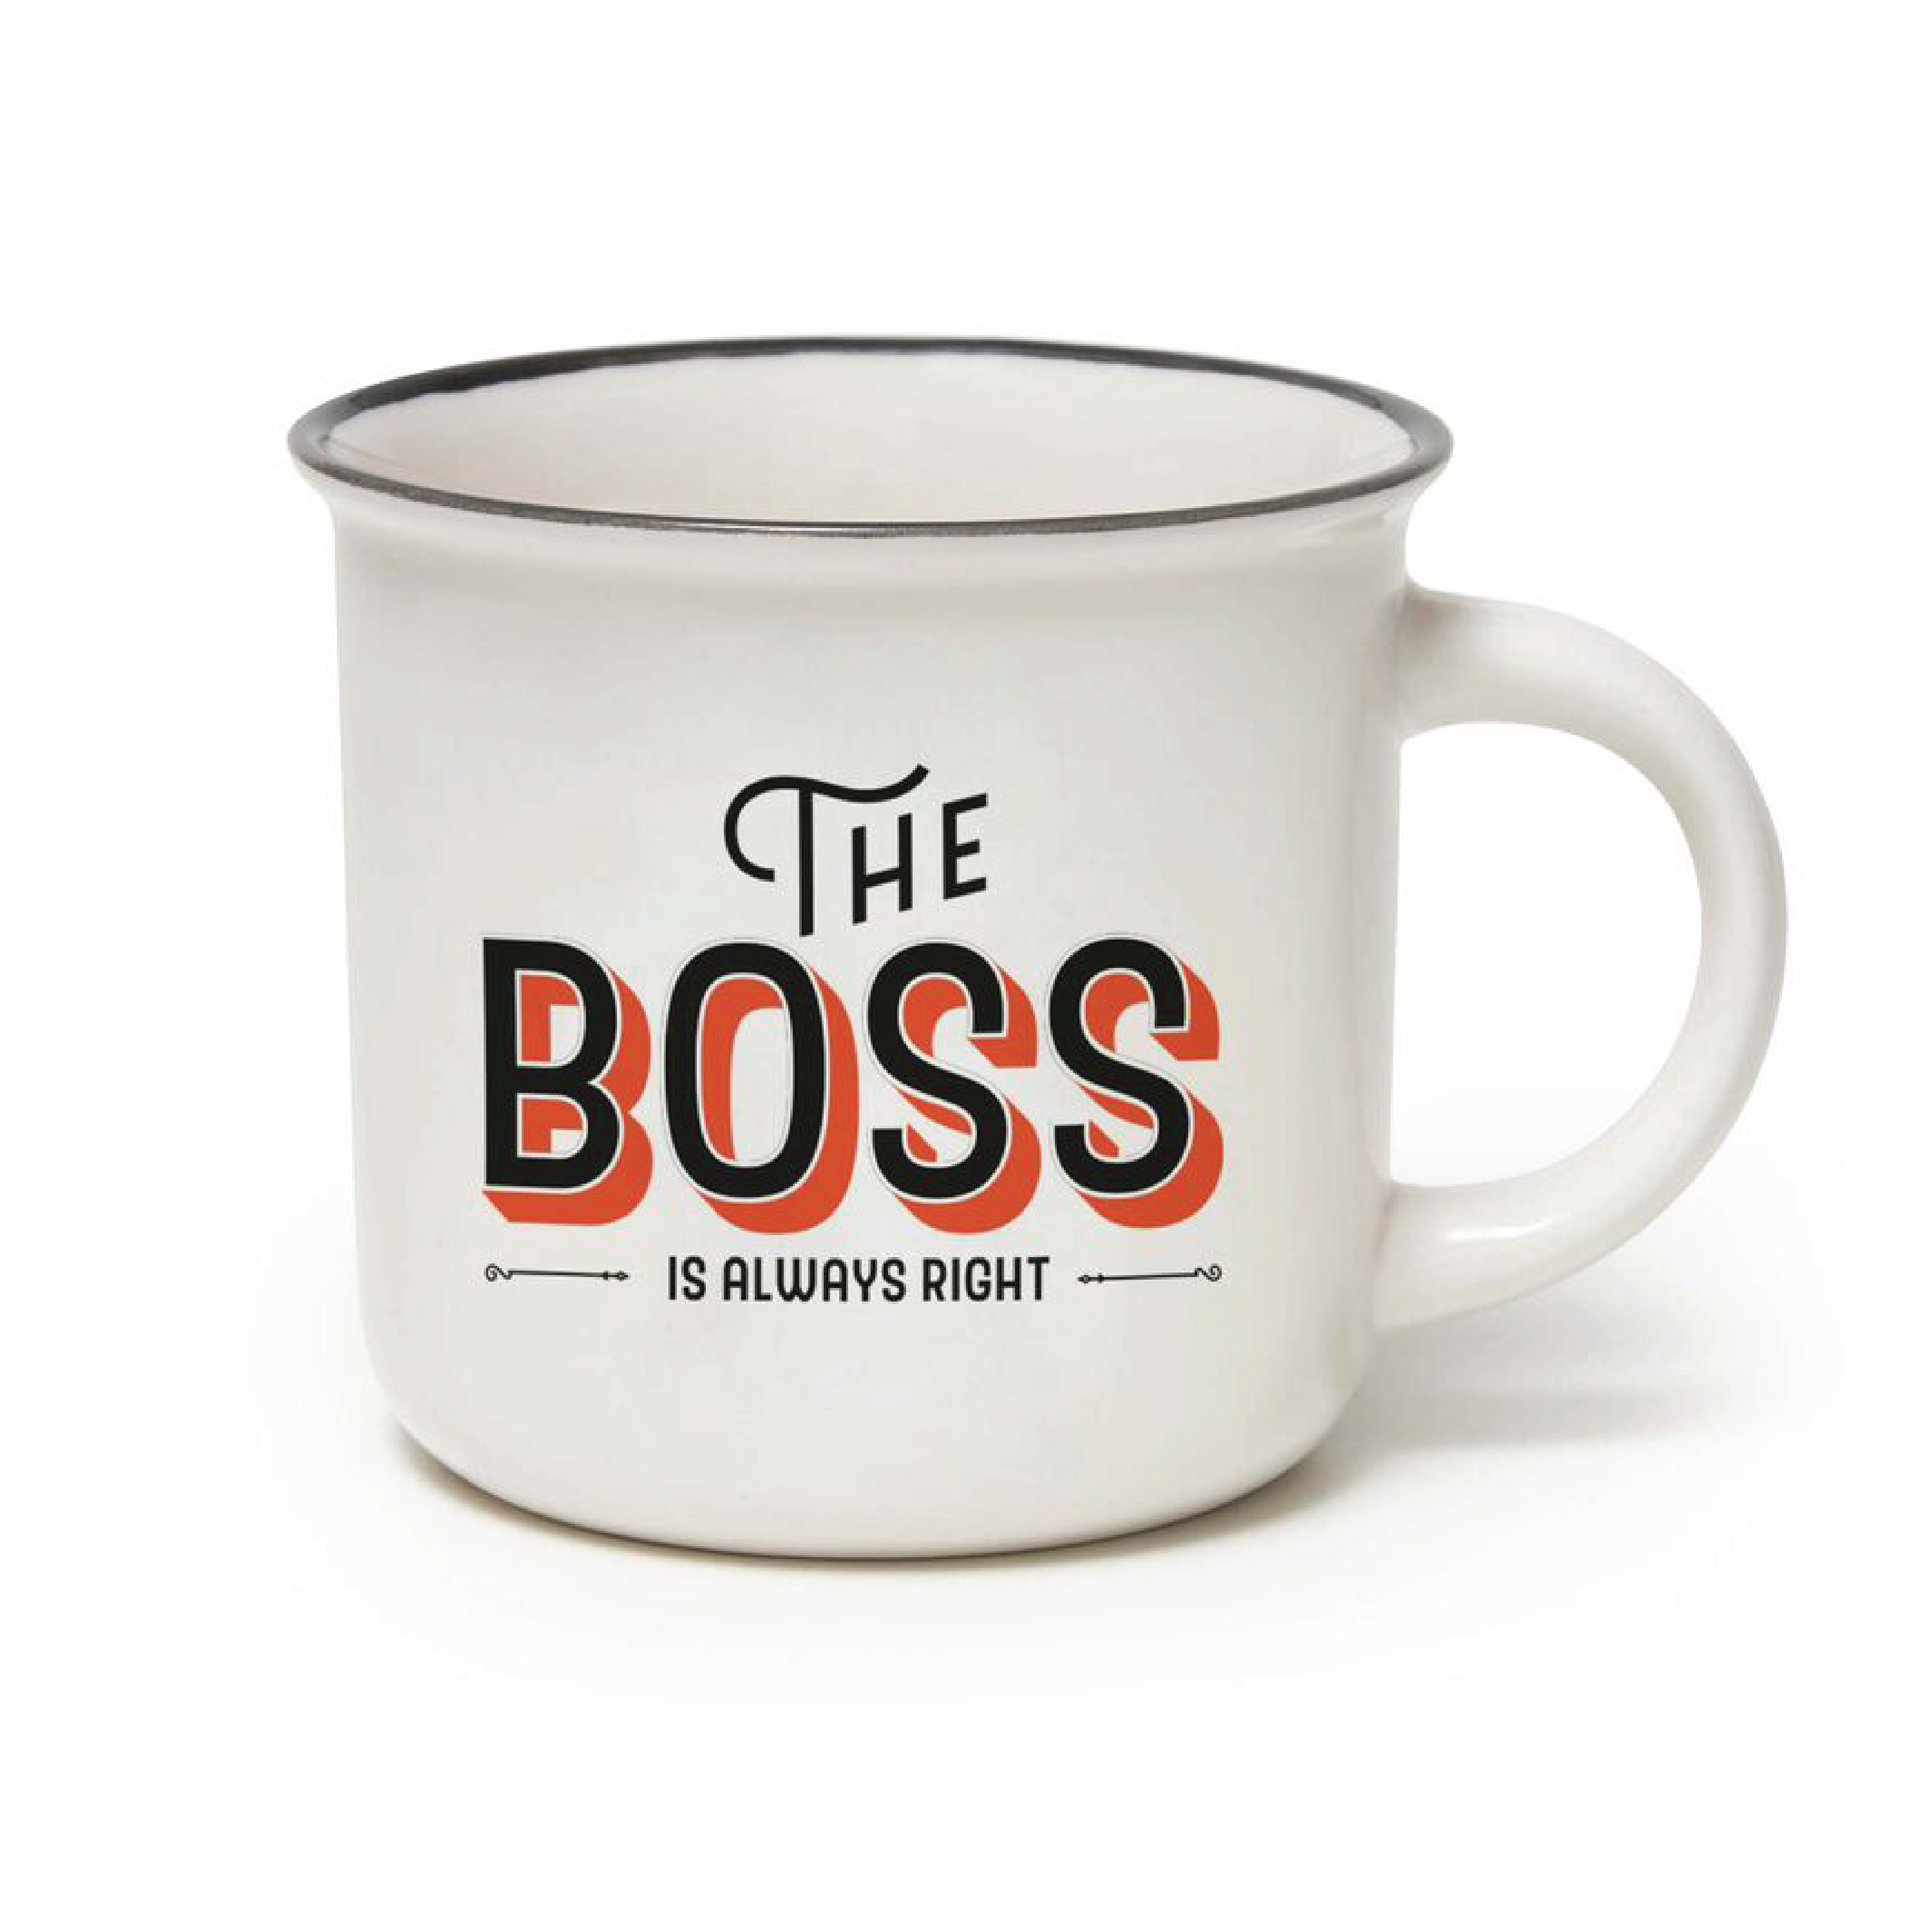 LEGAMI "The Boss" Cup-puccino krus, 350 ml, 1 stk.